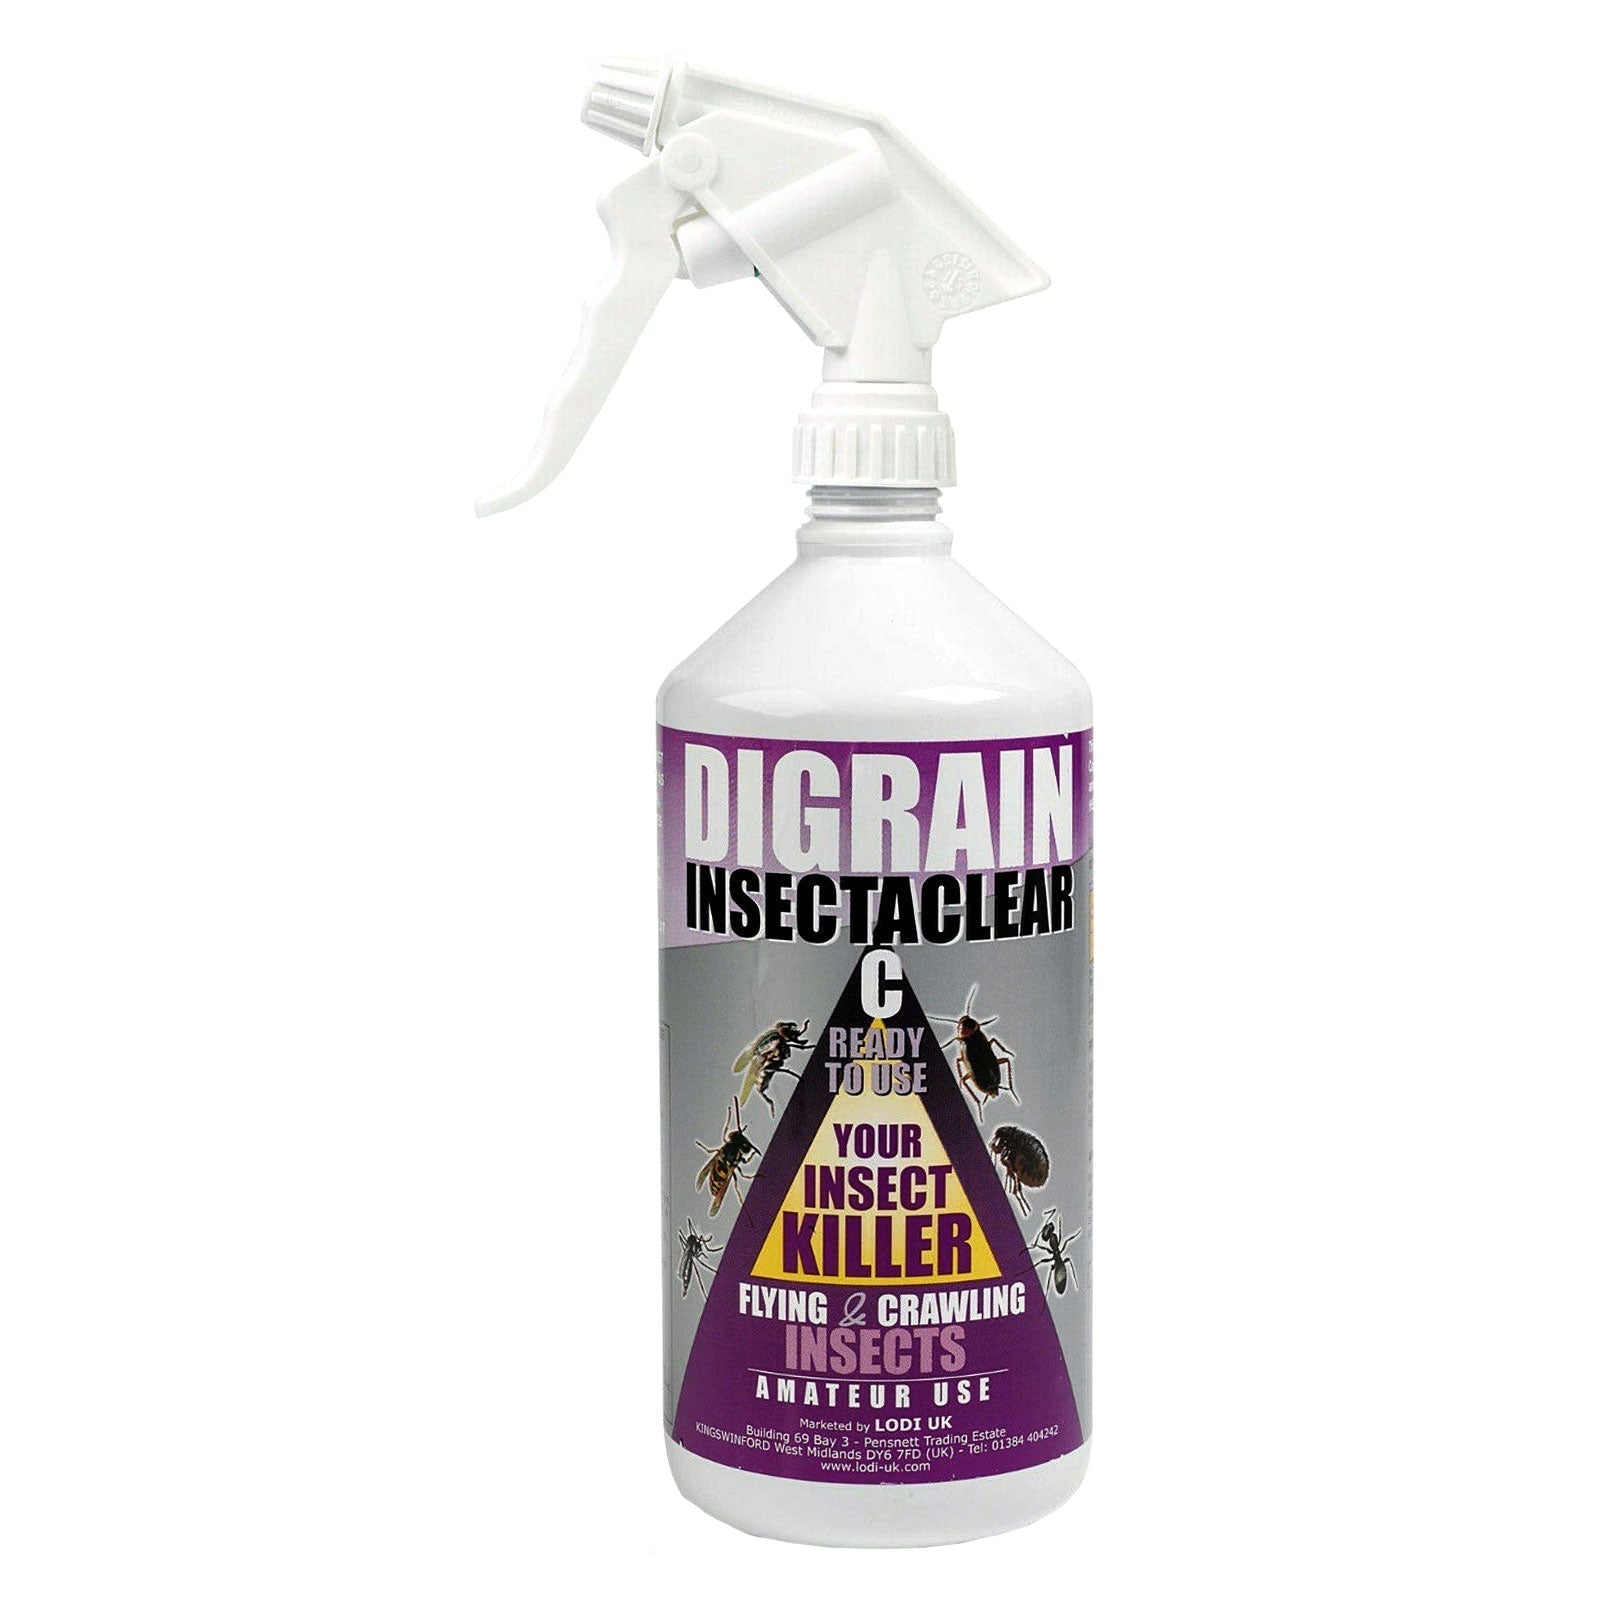 Digrain Insectaclear C+ Clothes Moth Killing Spray Ready to use - 1 Litre x 12 - Moth Control